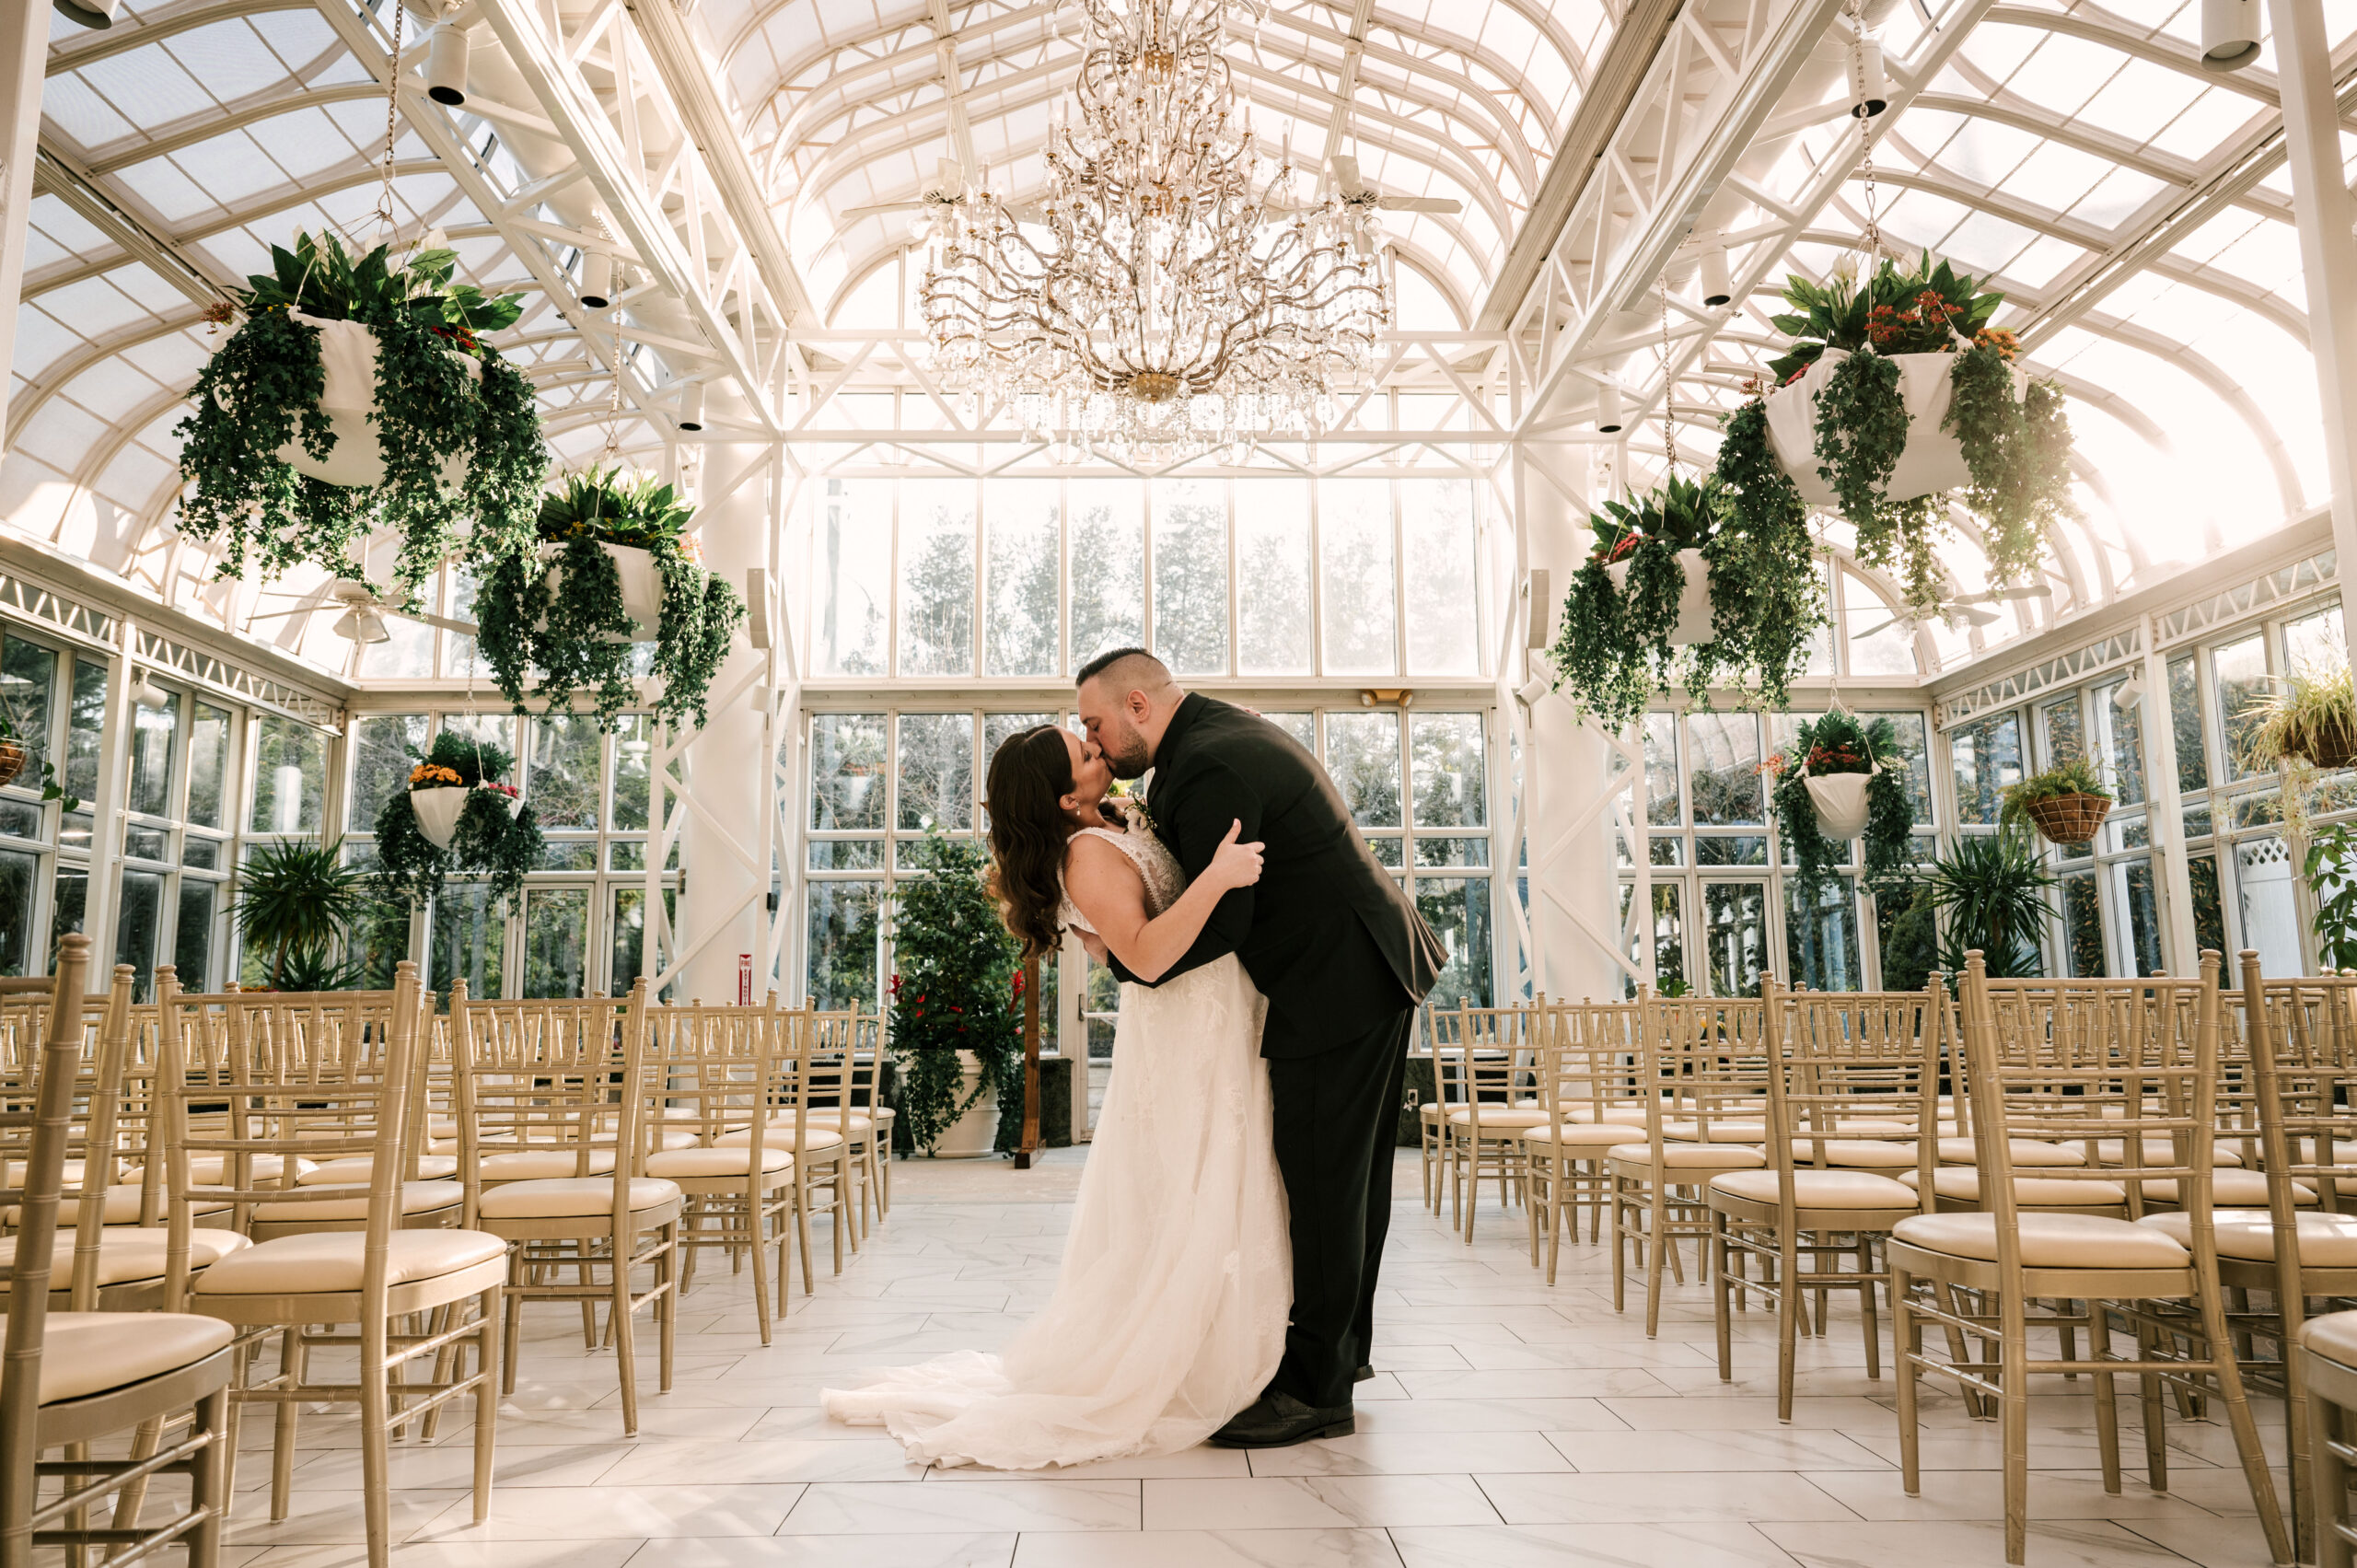 bride and groom kiss and dip inside the atrium ceremony space at Madison Hotel in New Jersey for their March wedding